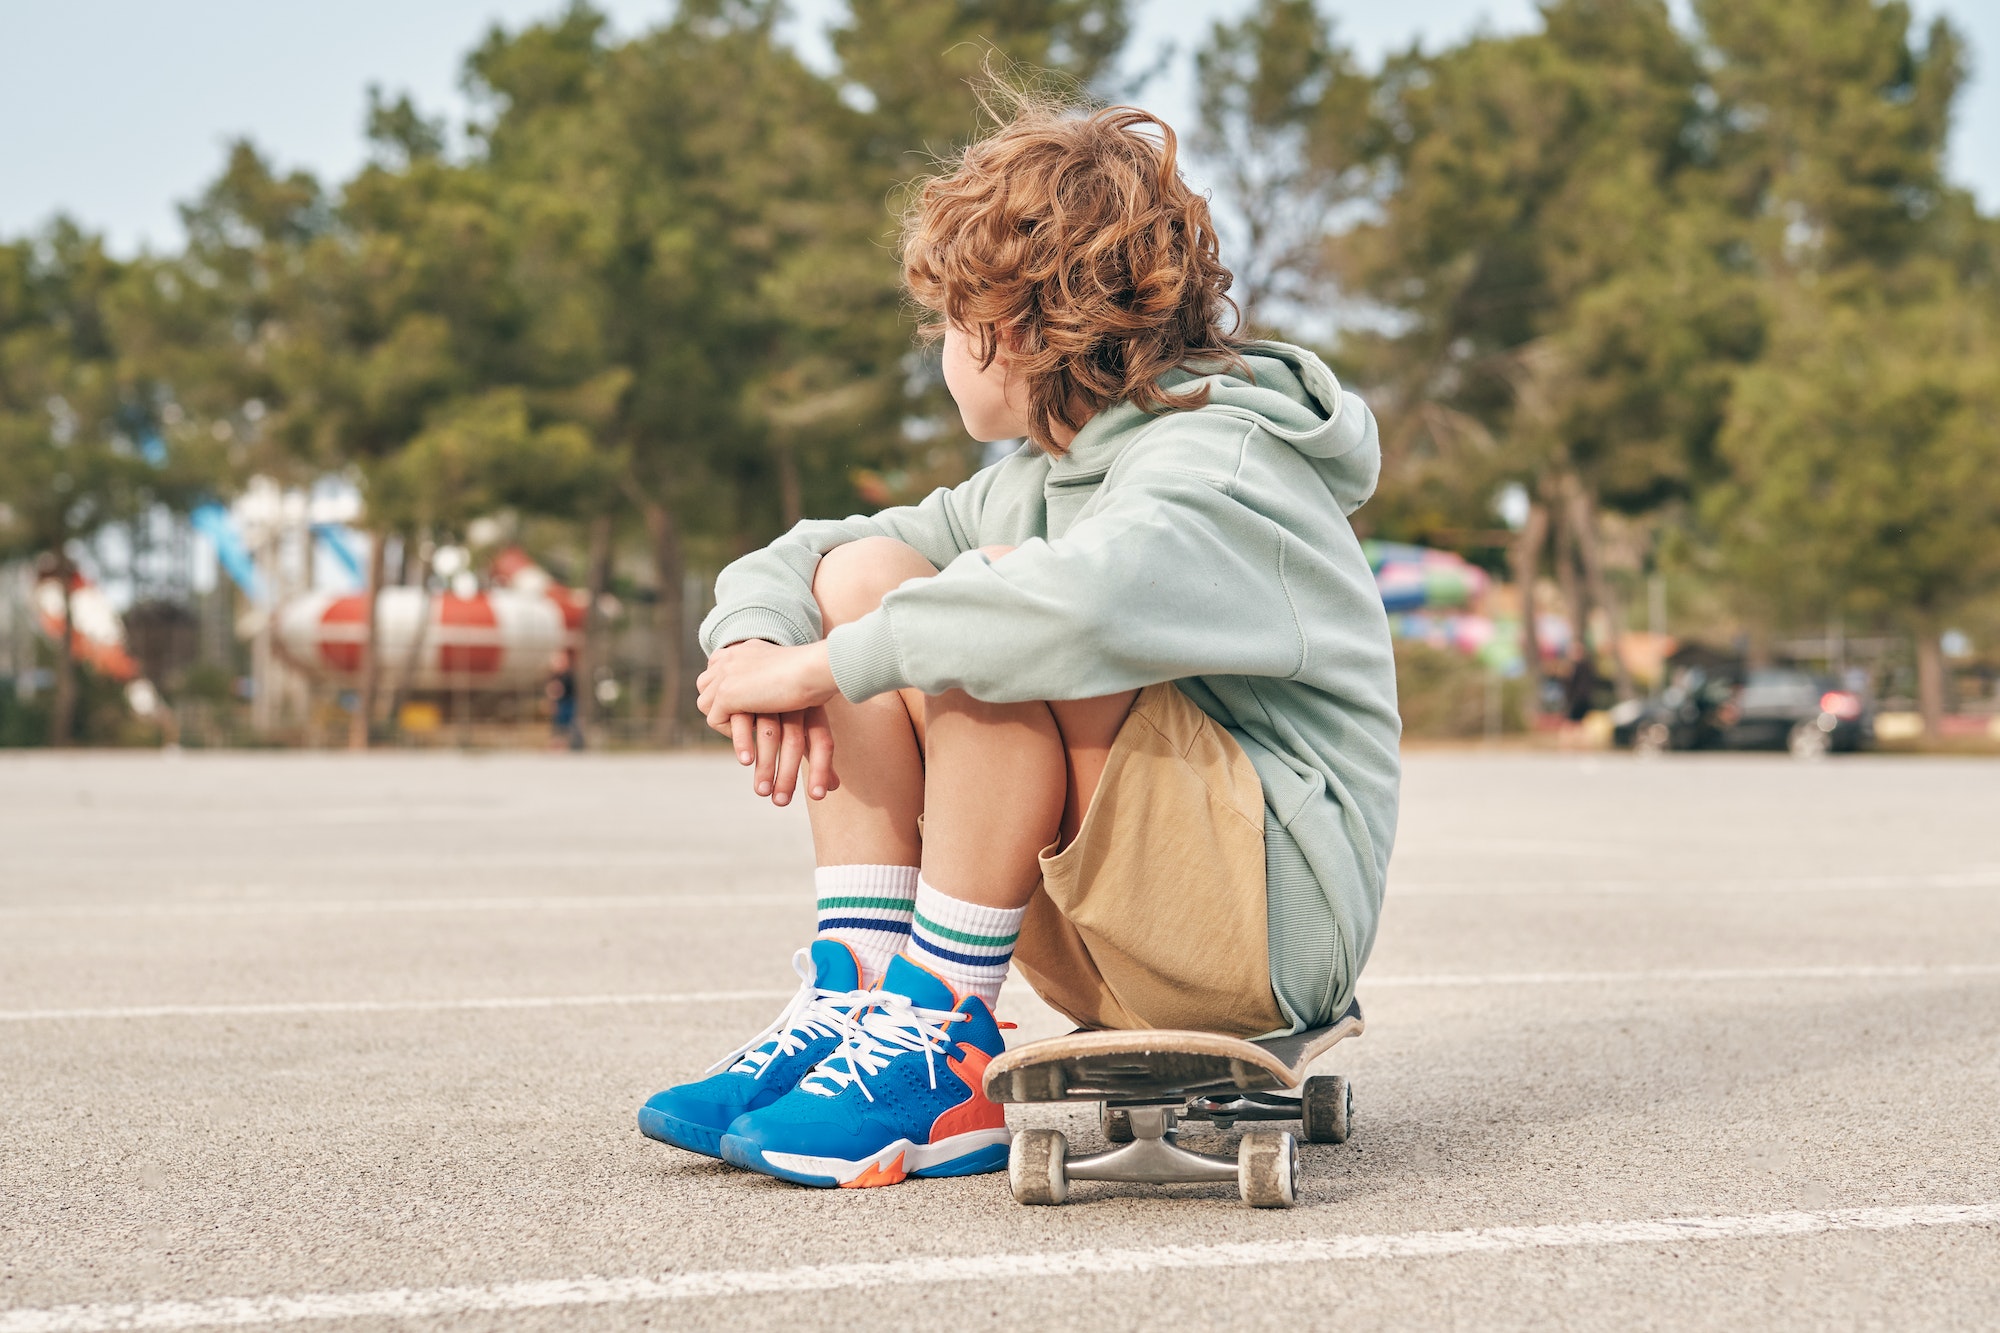 Unrecognizable teenager sitting on skateboard in city